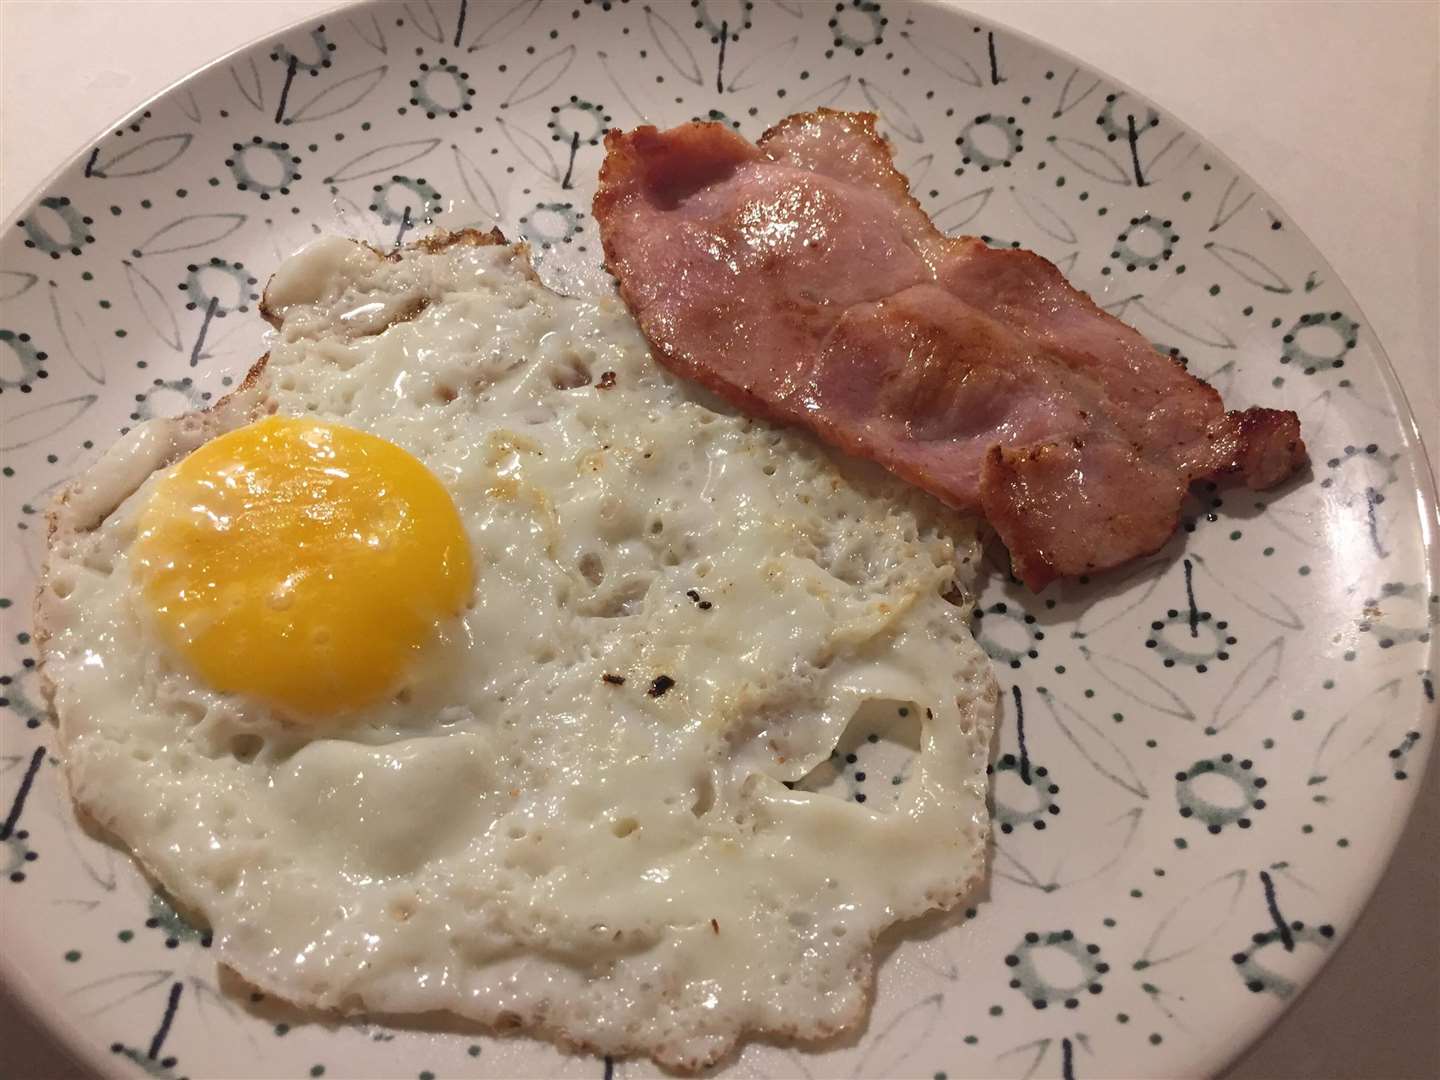 Good old bacon and egg